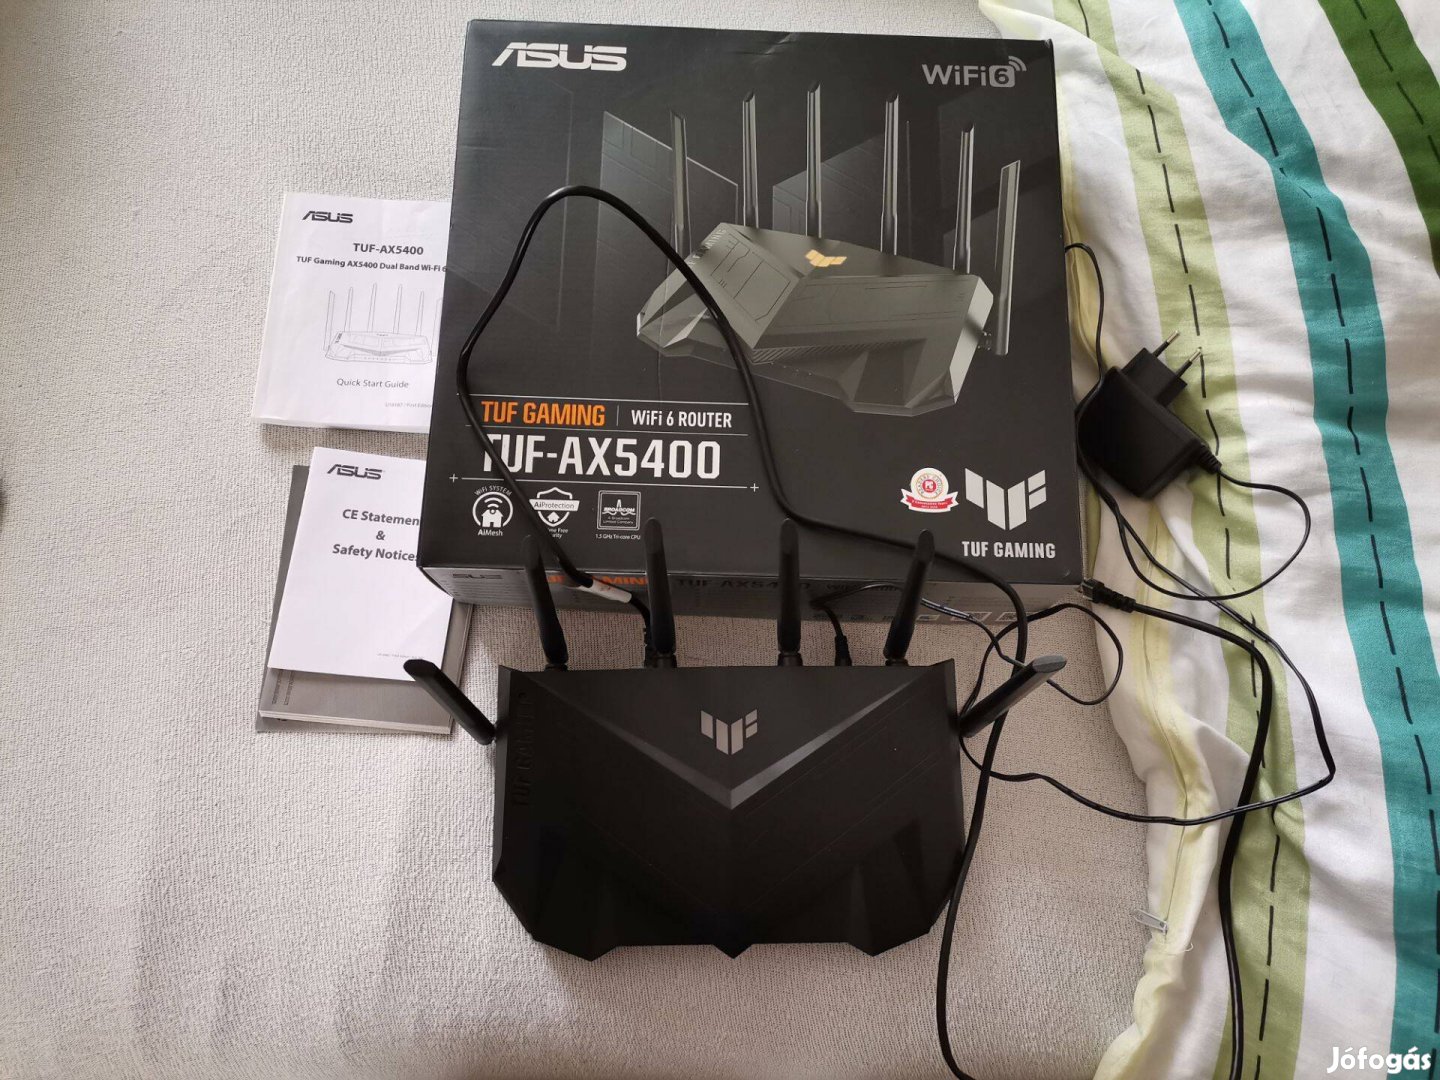 Asus Tuf-AX5400 WI-FI Router